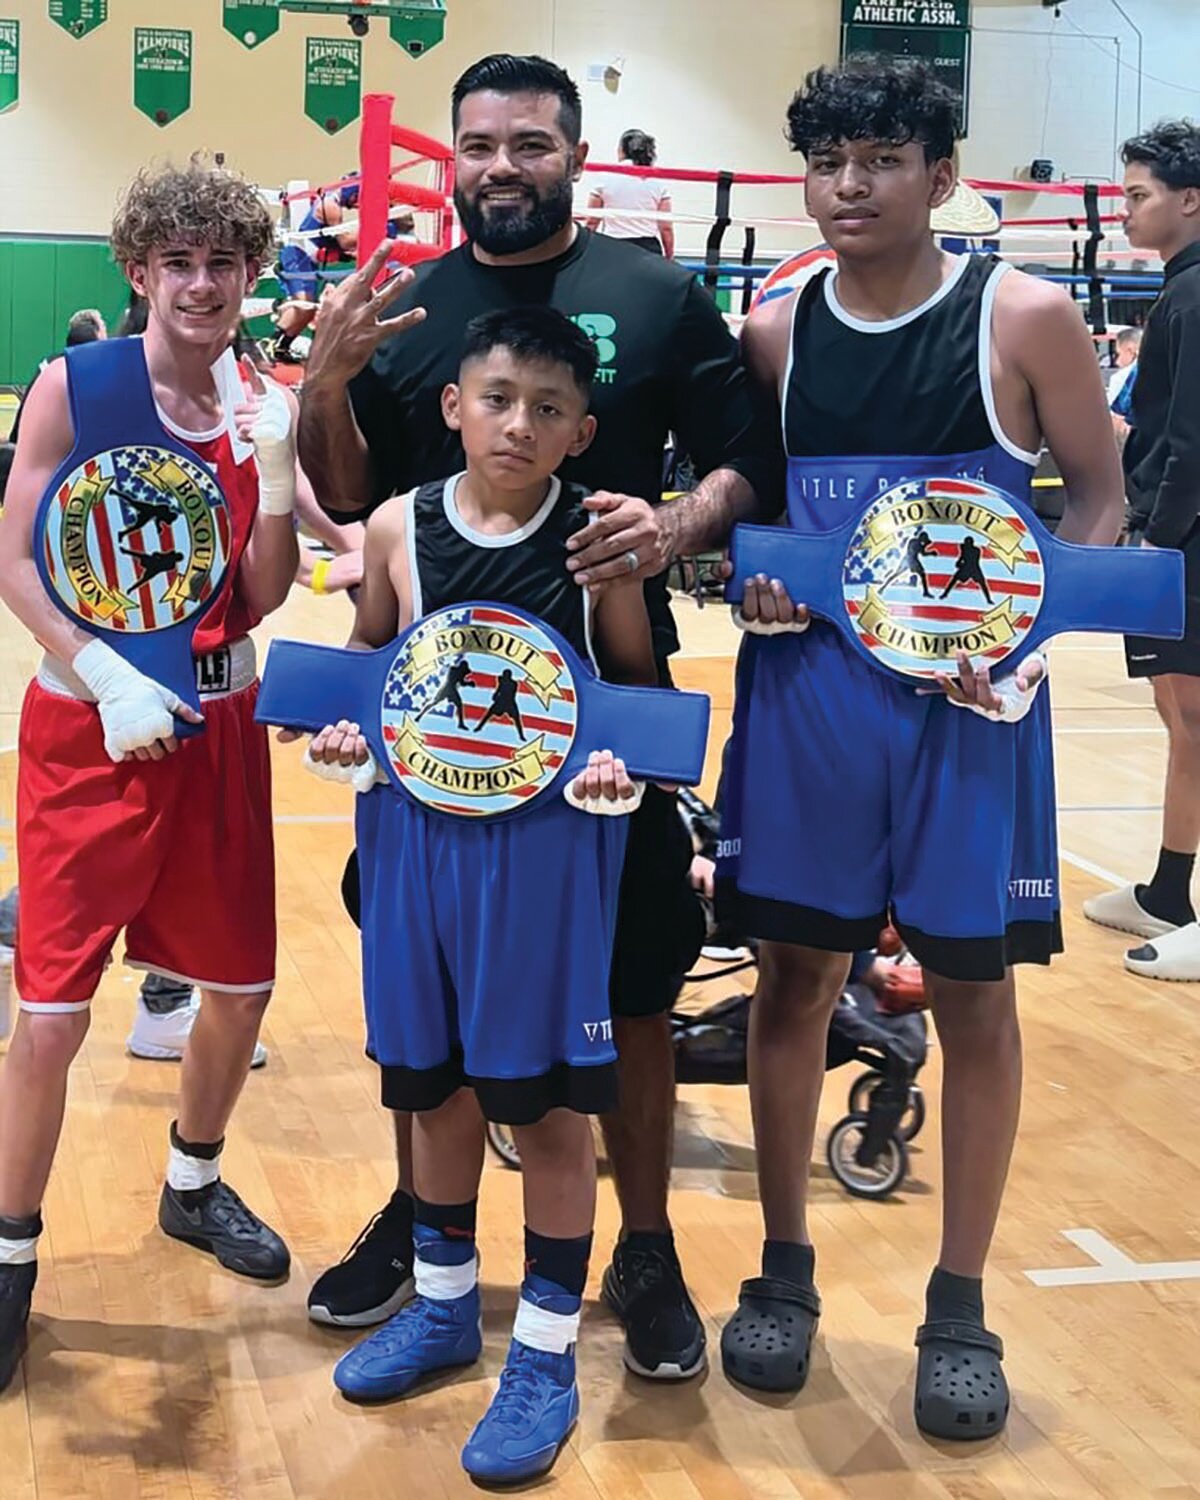 On Saturday, March 23rd, three of our athletes participated in the USA Boxing Lake Placid BOXOFF. Pictured left is Dyllyn Heasley with his 5th consecutive win. Bottom center is Dylan Sanchez Hernandez and top row center is Head Coach Manuel Sanchez. On the right is Jacob Chavez.. All the three athletes secured a unanimous decision win over their opponents and won the BOXOFF Championship belt in their respective divisions. [Courtesy photo]